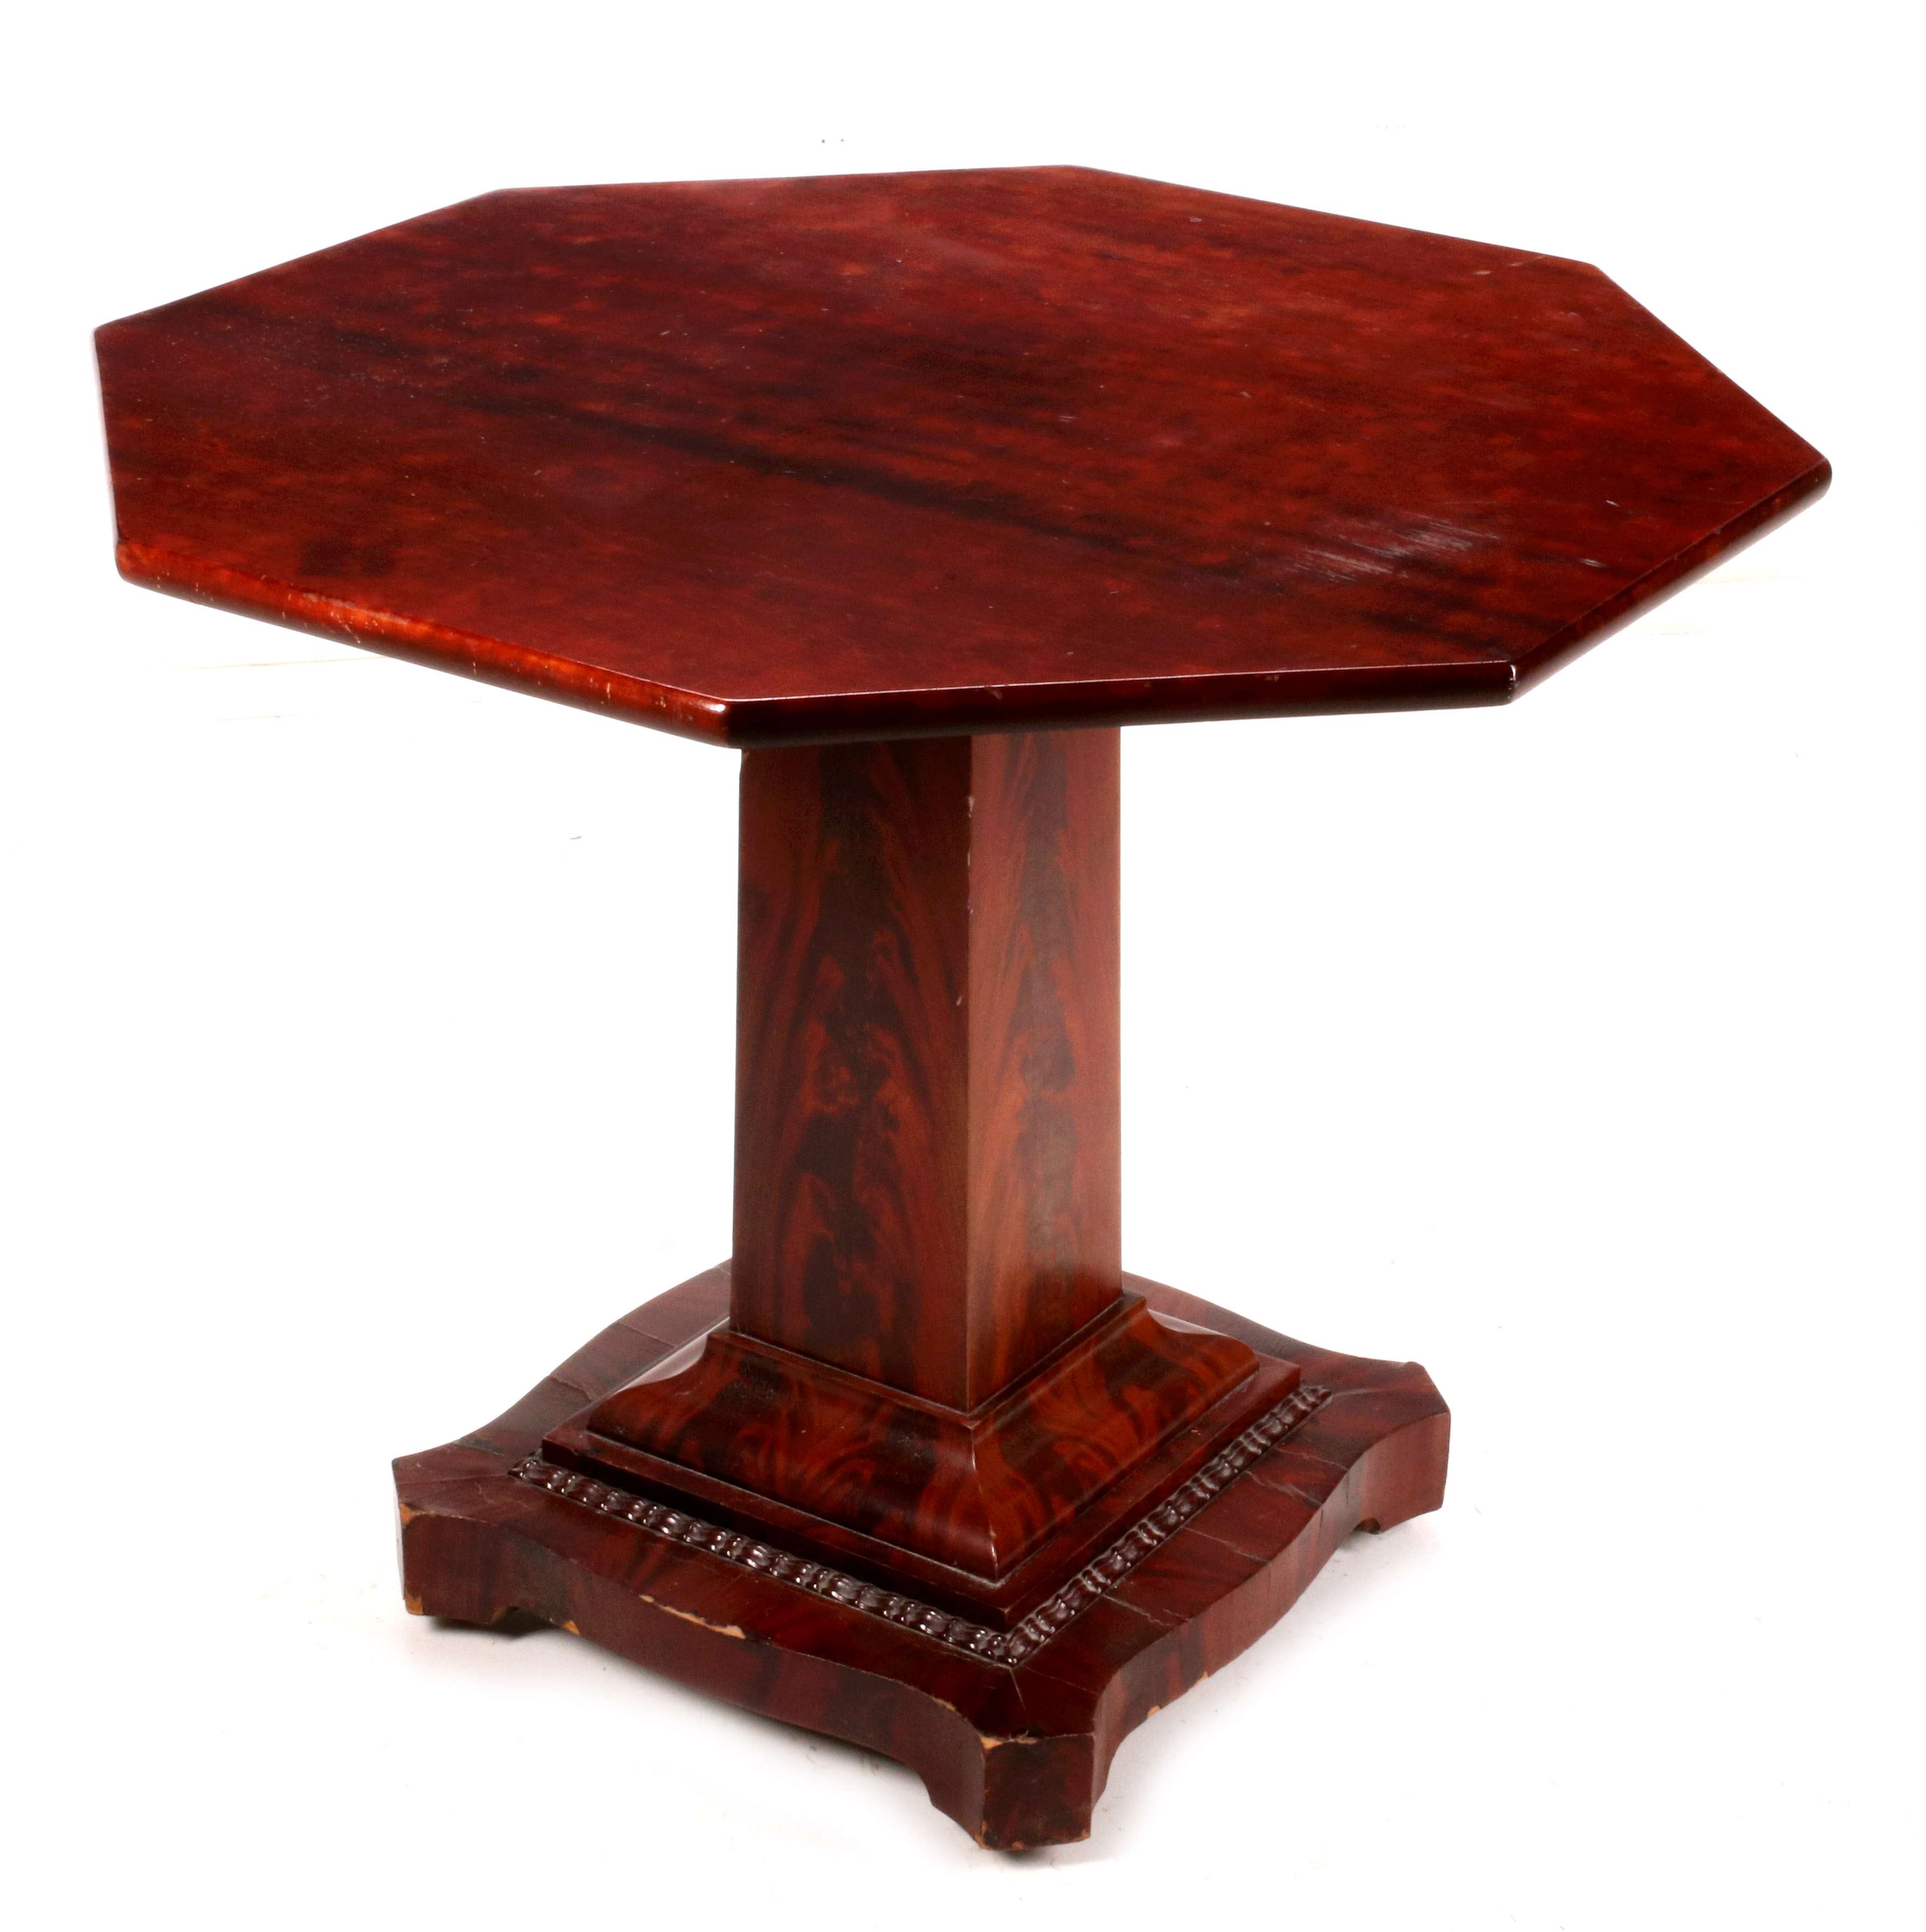 A FIRST PERIOD EMPIRE MAHOGANY CENTER TABLE